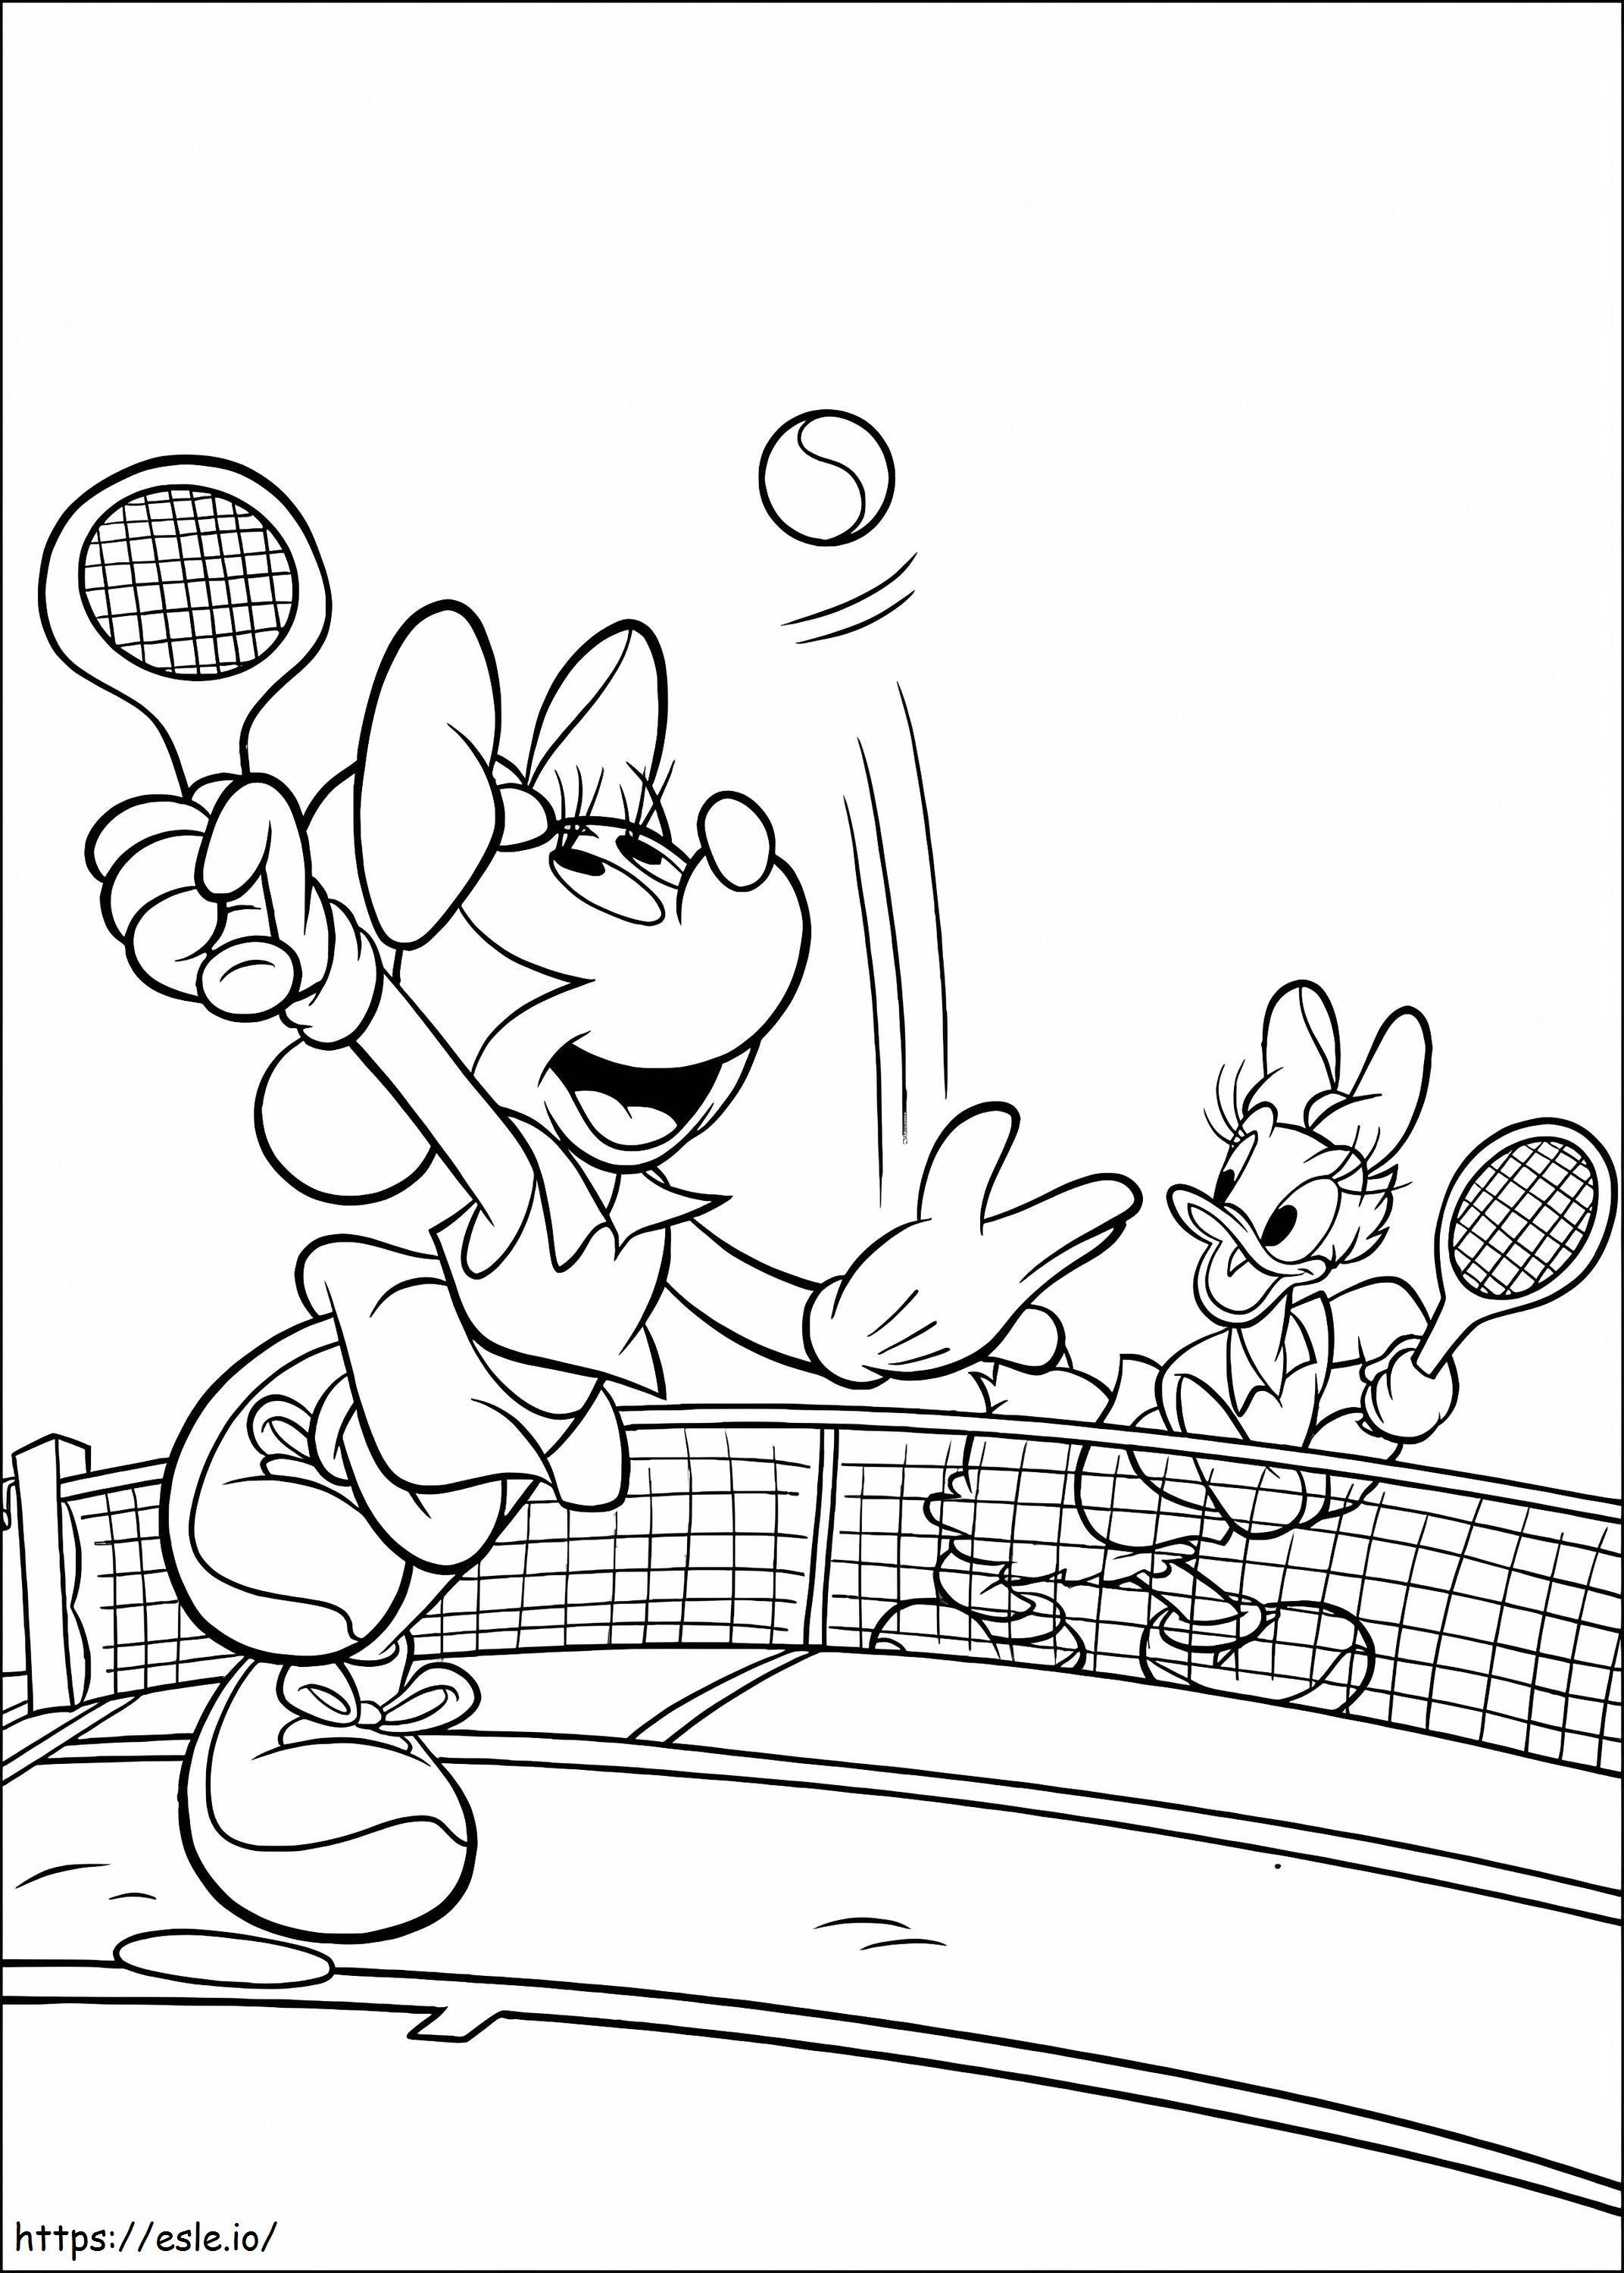 Minnie Mouse And Daisy Duck Play Tennis coloring page